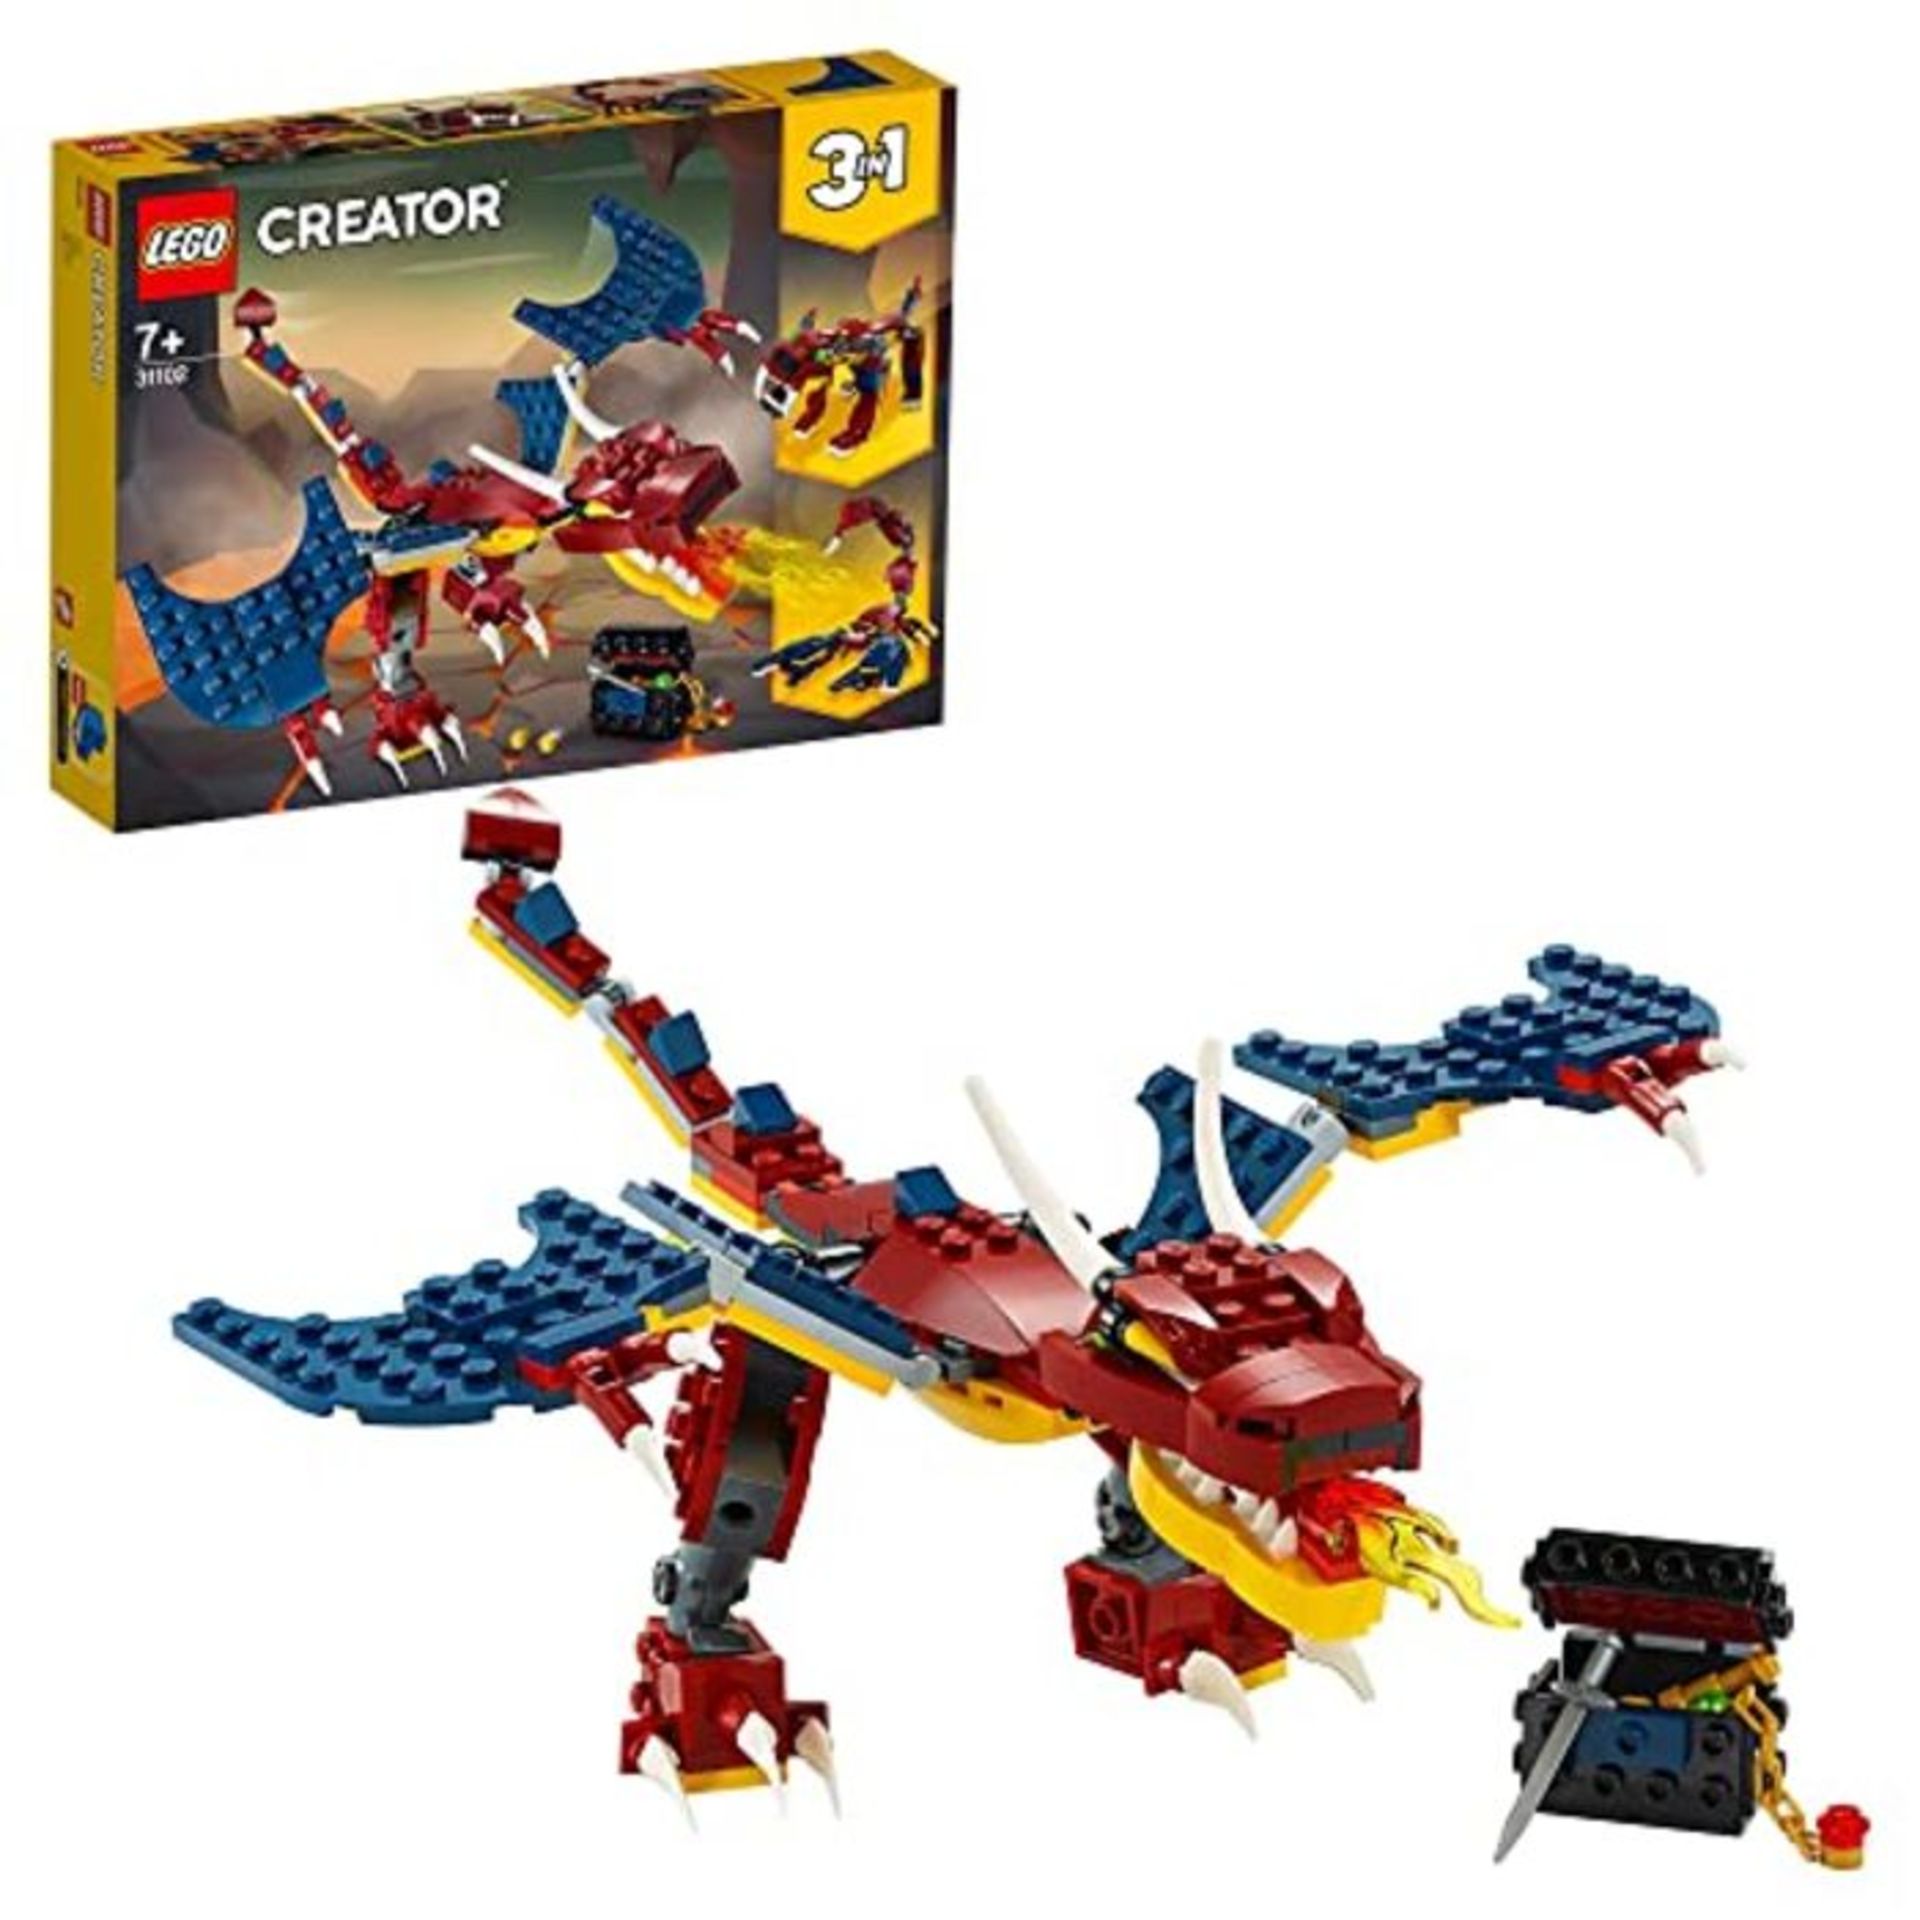 LEGO 31102 Creator 3in1 Fire Dragon - Tiger - Scorpion Building Set, Mythical Creature